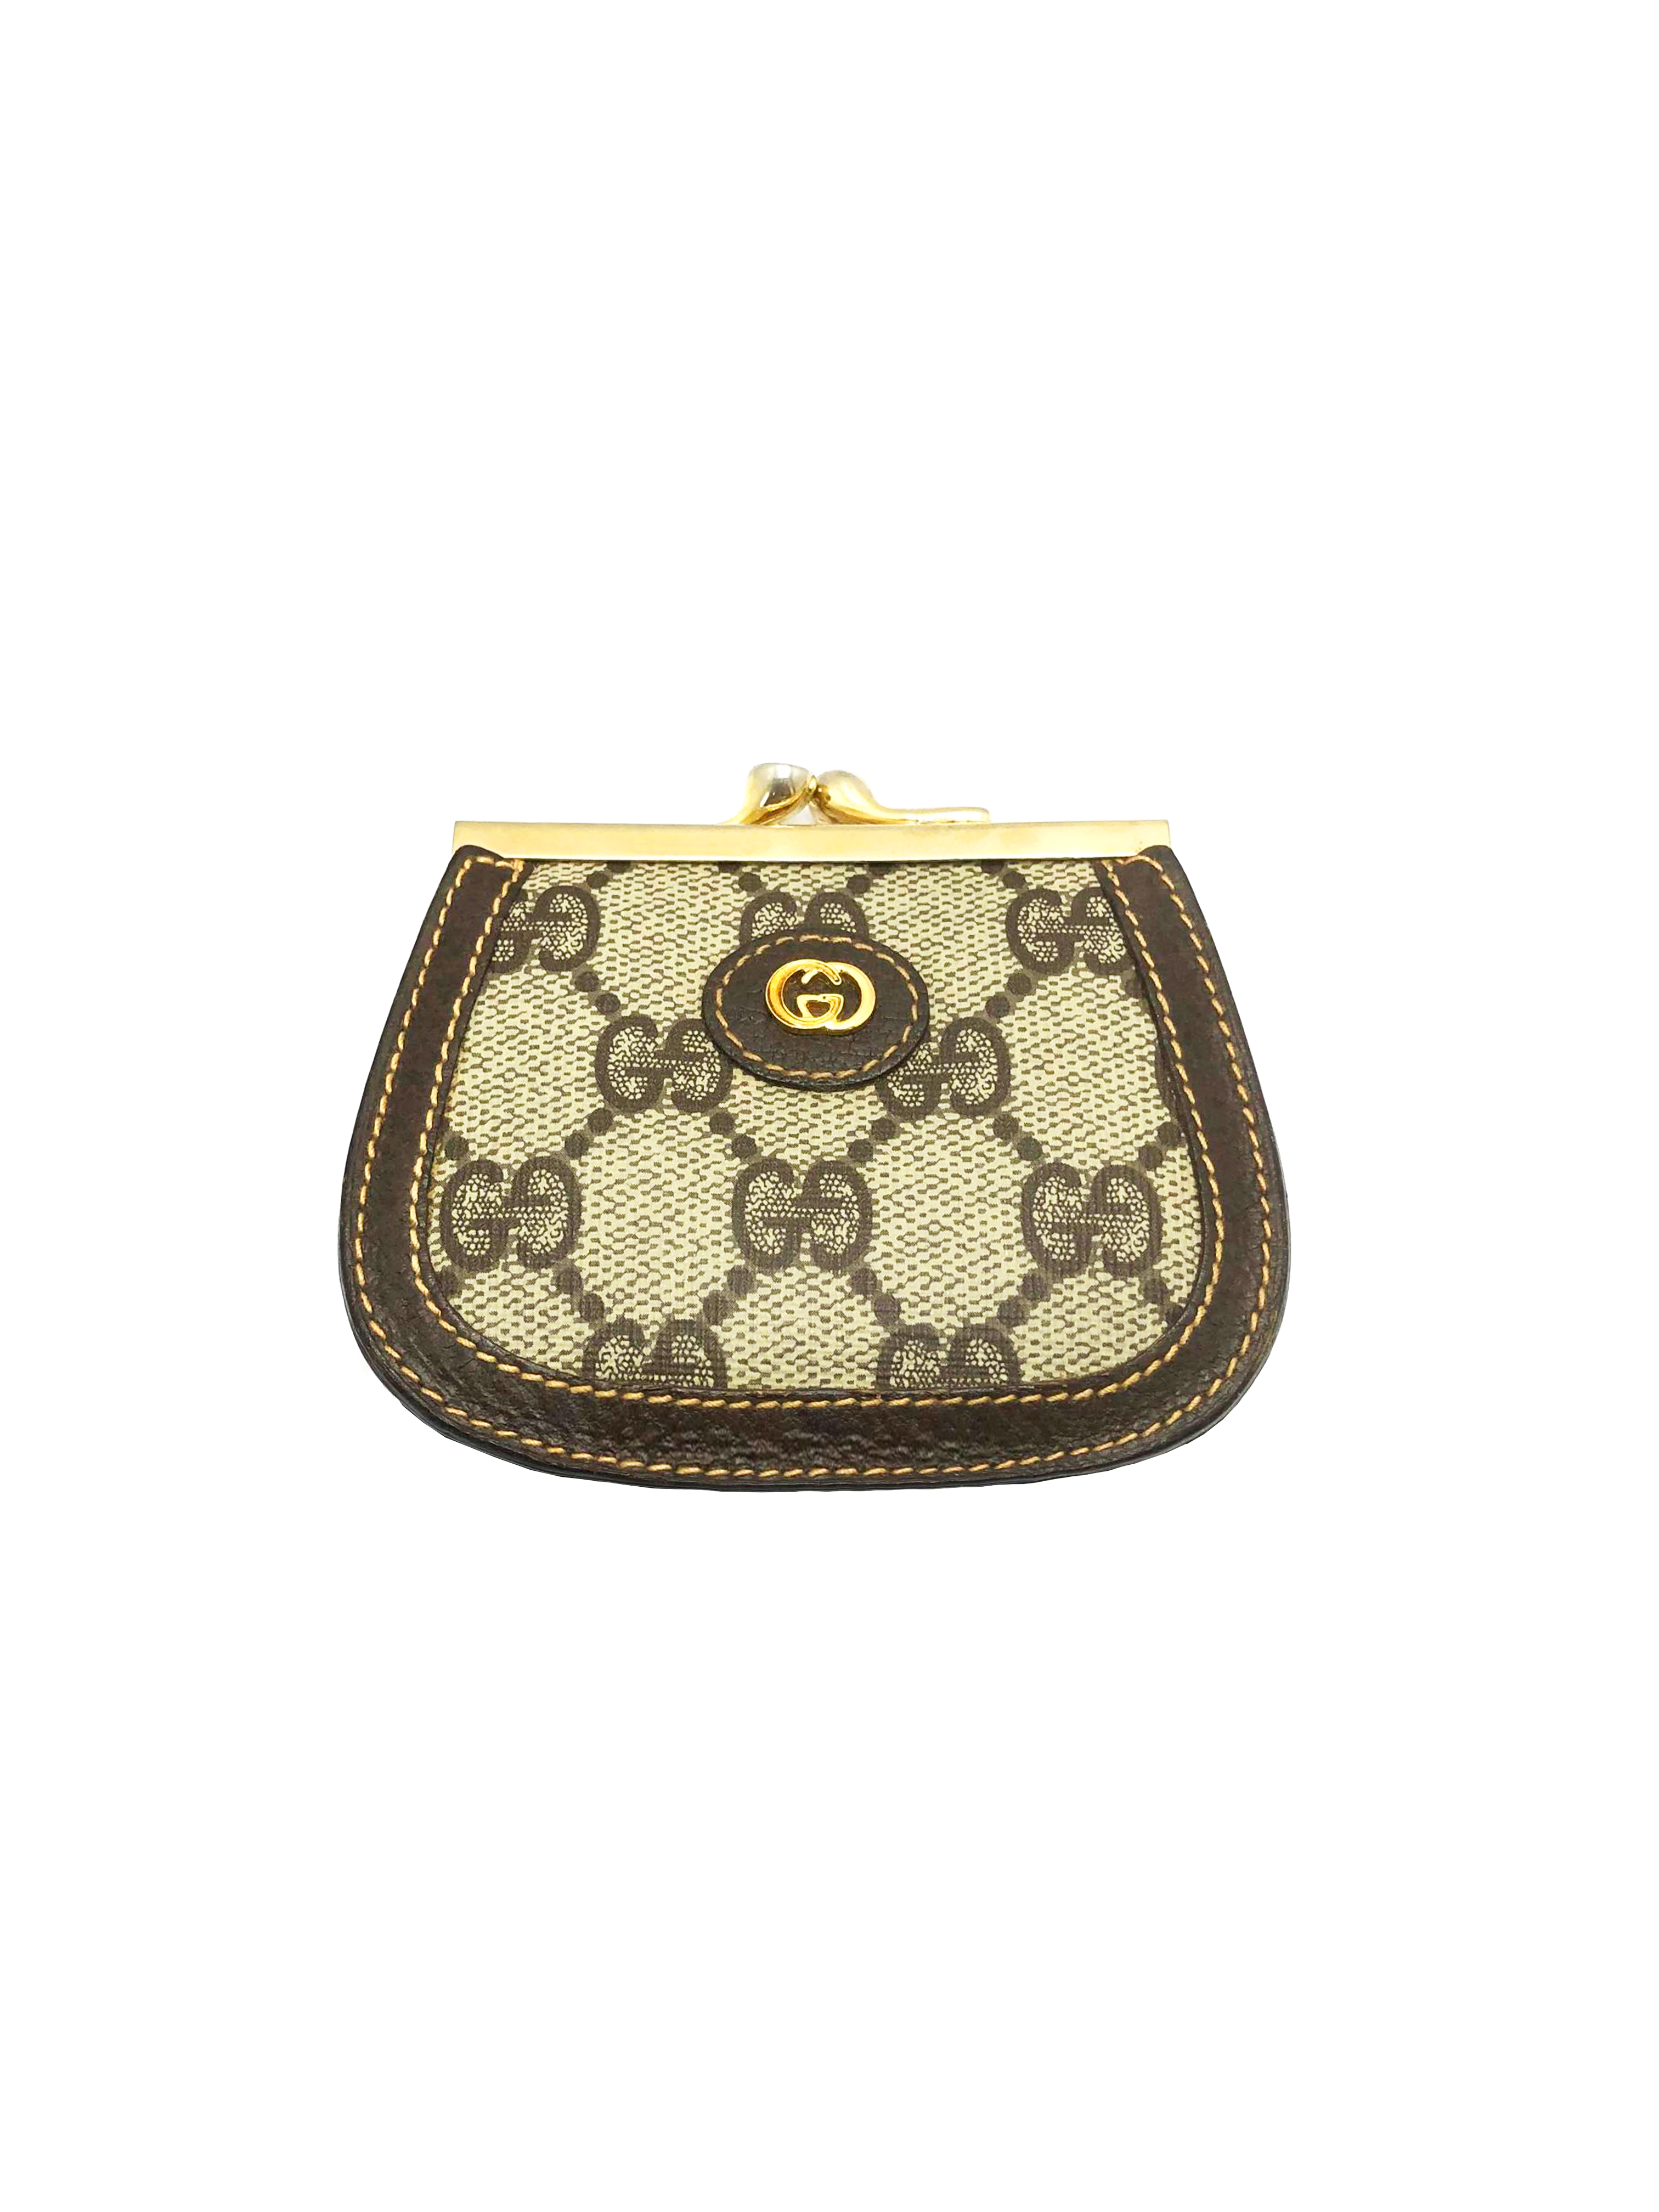 Gucci 2000s Round Coin Gold Pouch